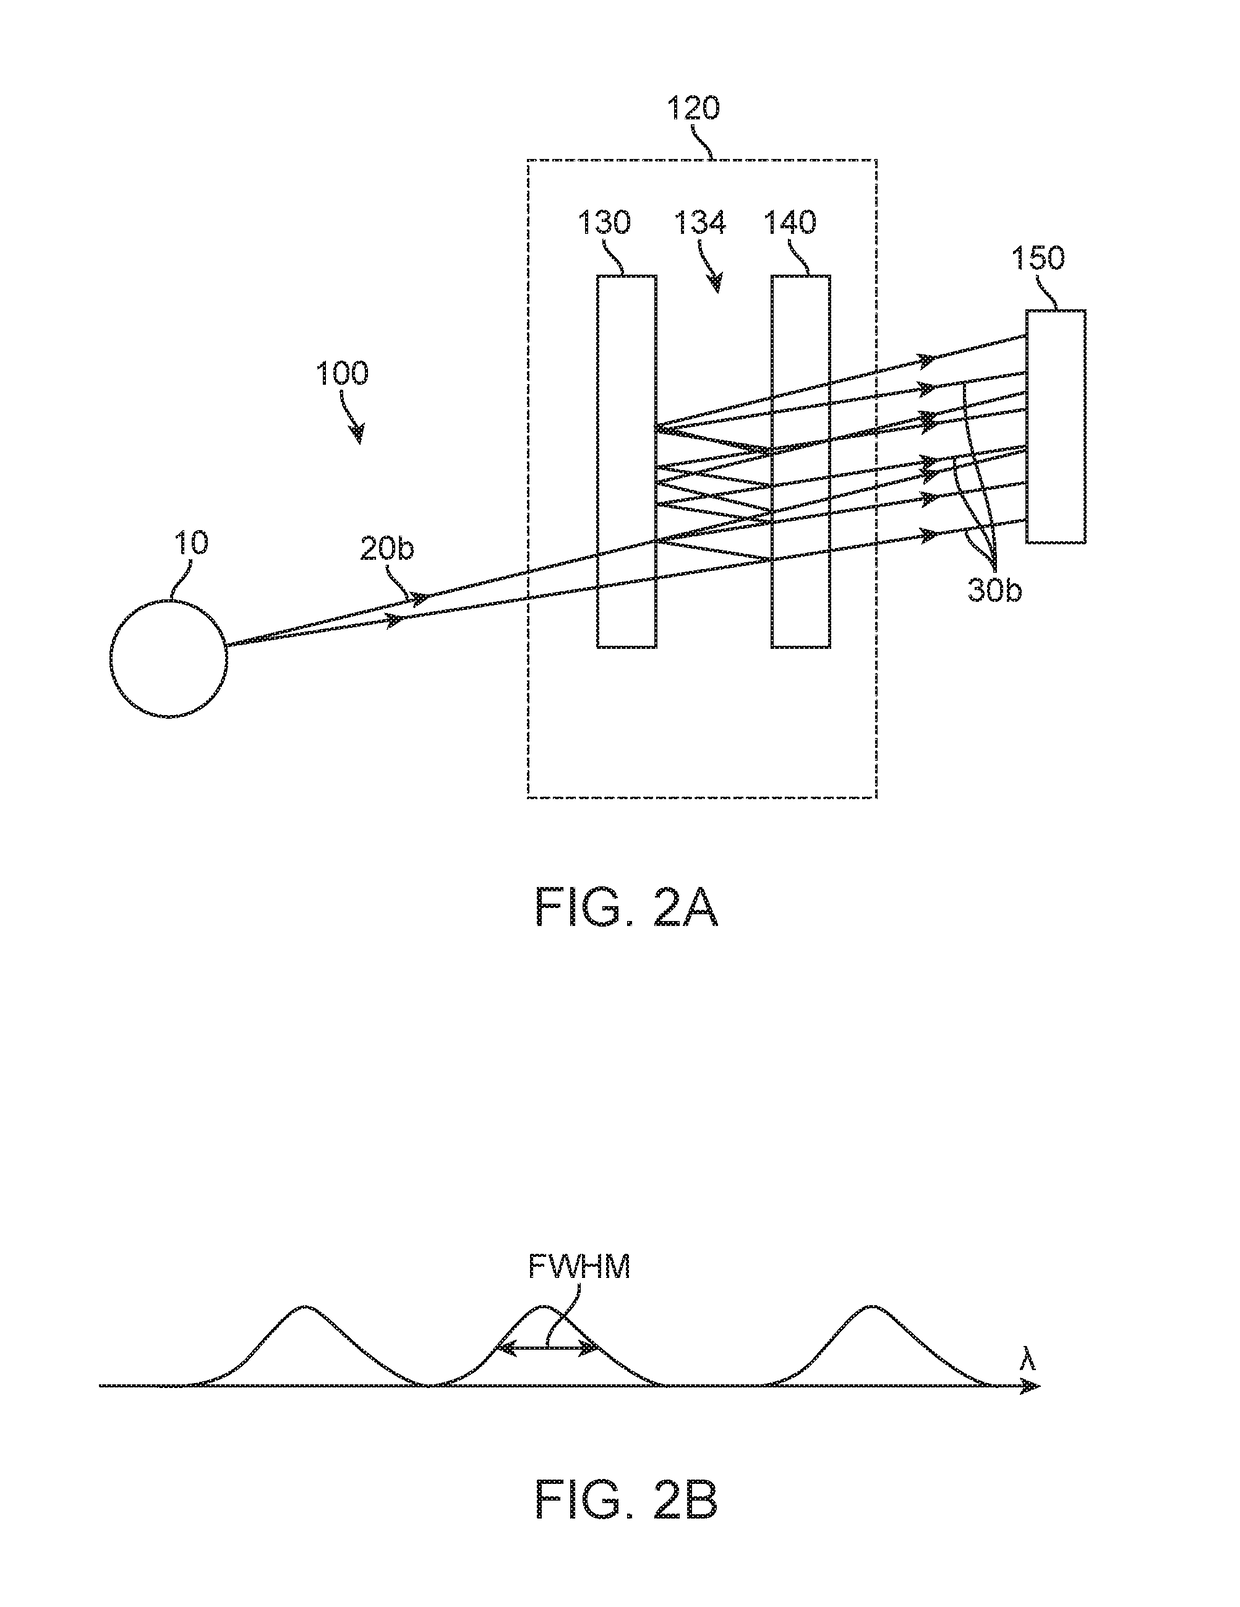 Fabry-perot spectrometer apparatus and methods